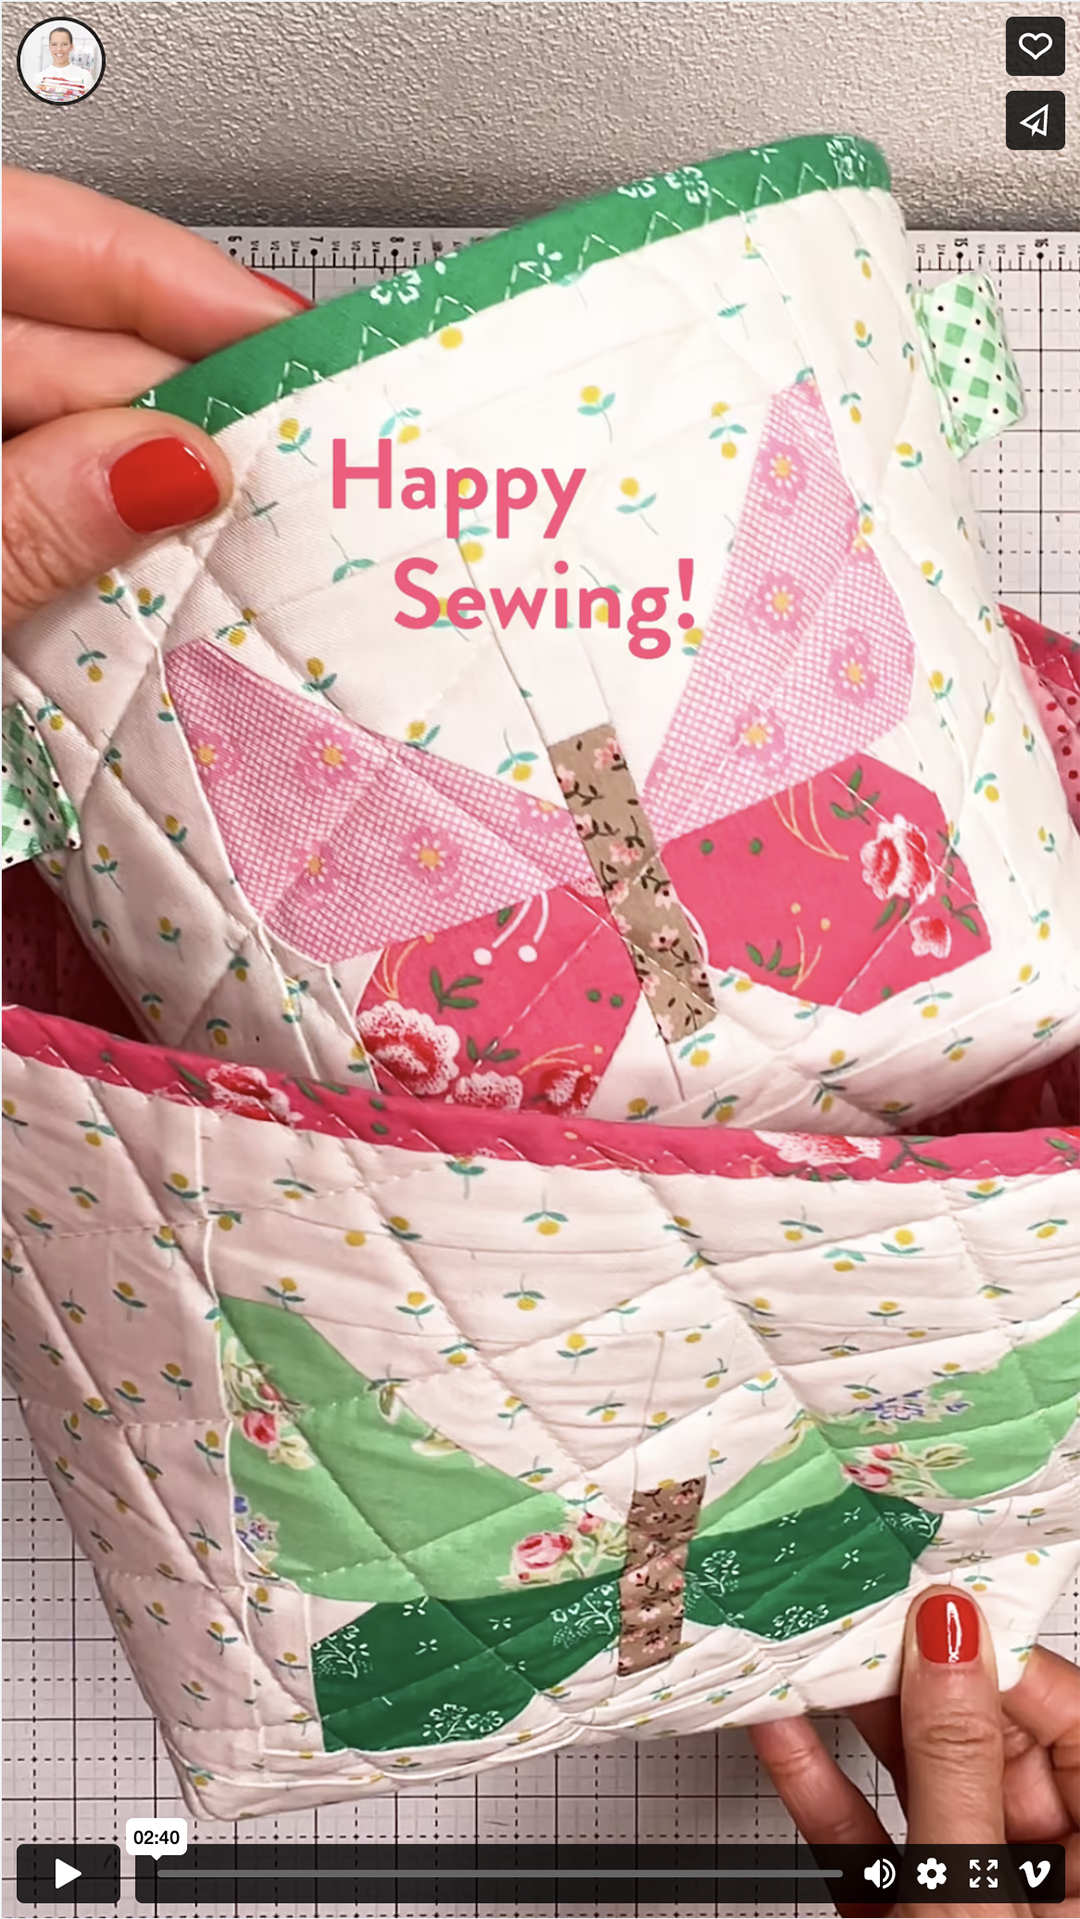 Butterfly Quilted Fabric Basket tutorial - an easy quilt pattern by ellis & higgs